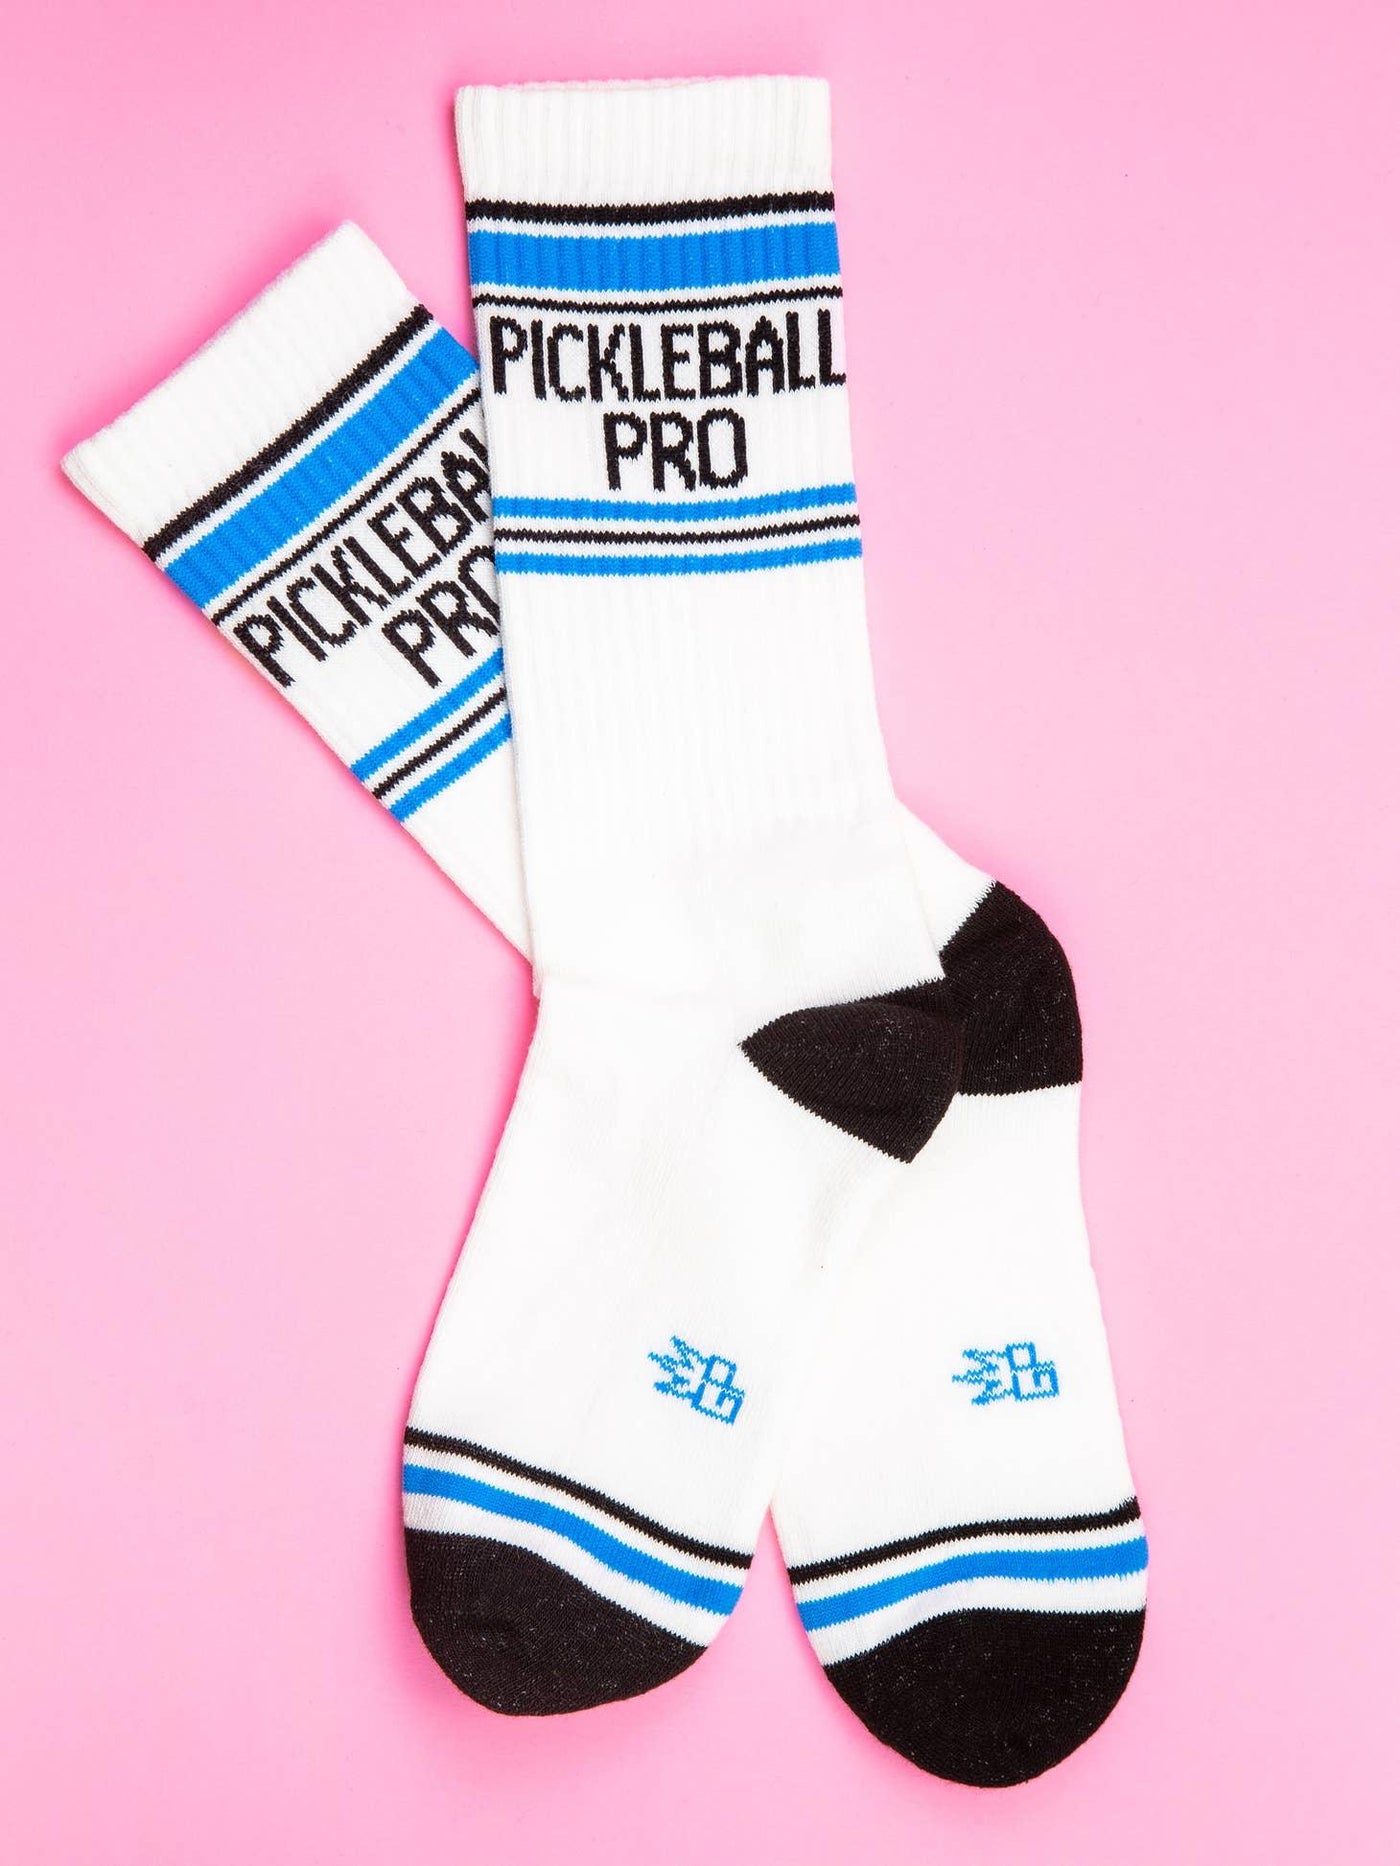 Pickleball Pro, Crew - Gumball Poodle - The Sock Monster